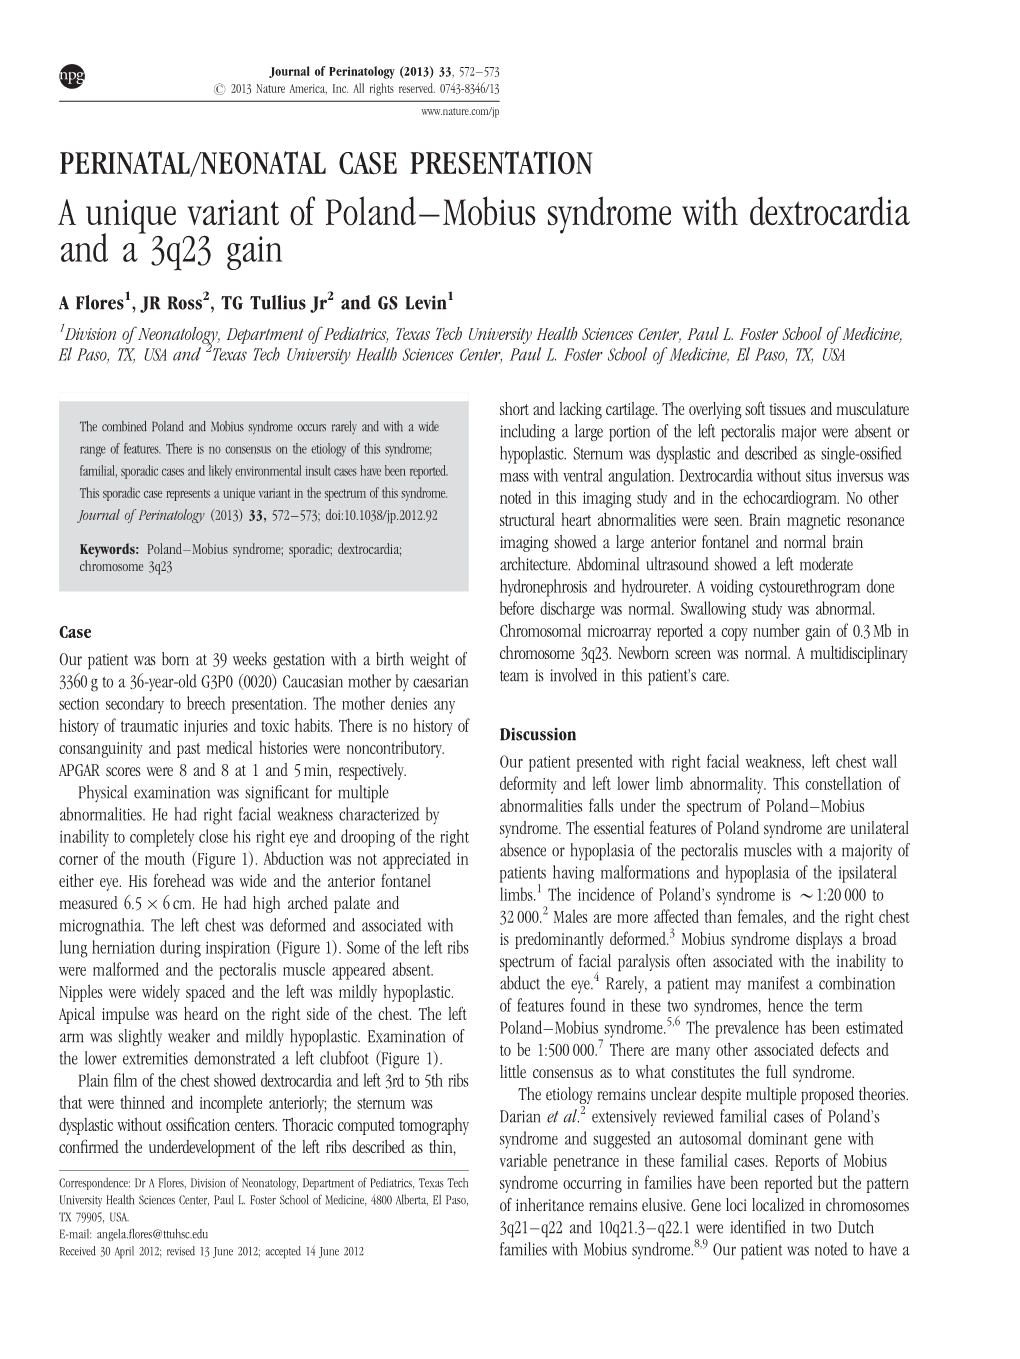 Mobius Syndrome with Dextrocardia and a 3Q23 Gain